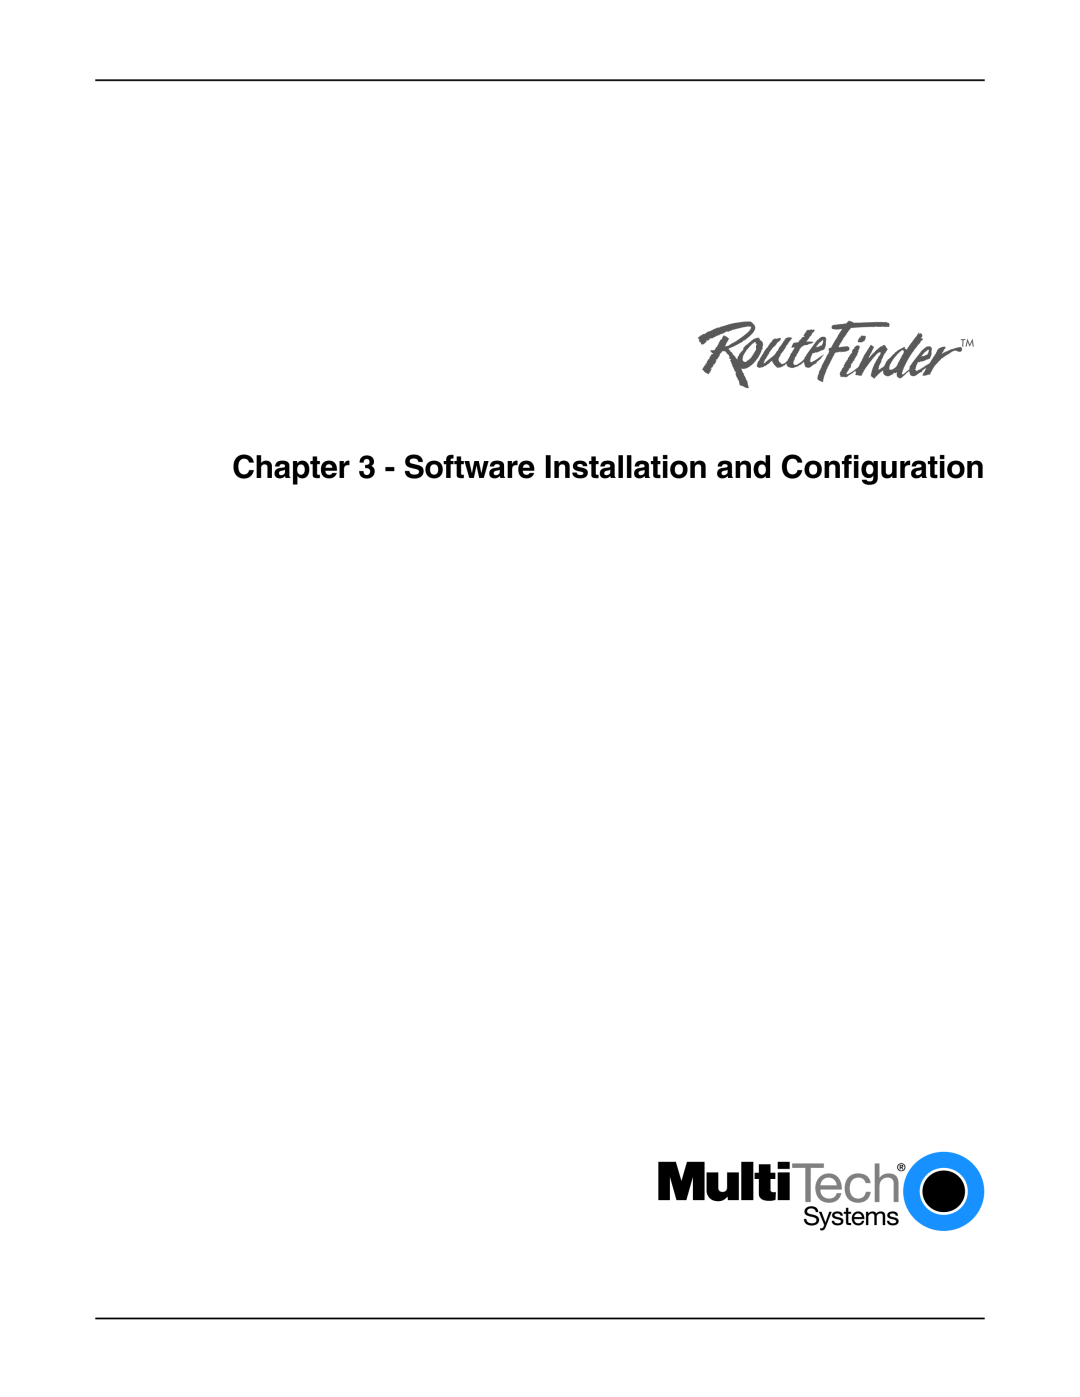 Multi-Tech Systems RF802EW manual Software Installation and Configuration 